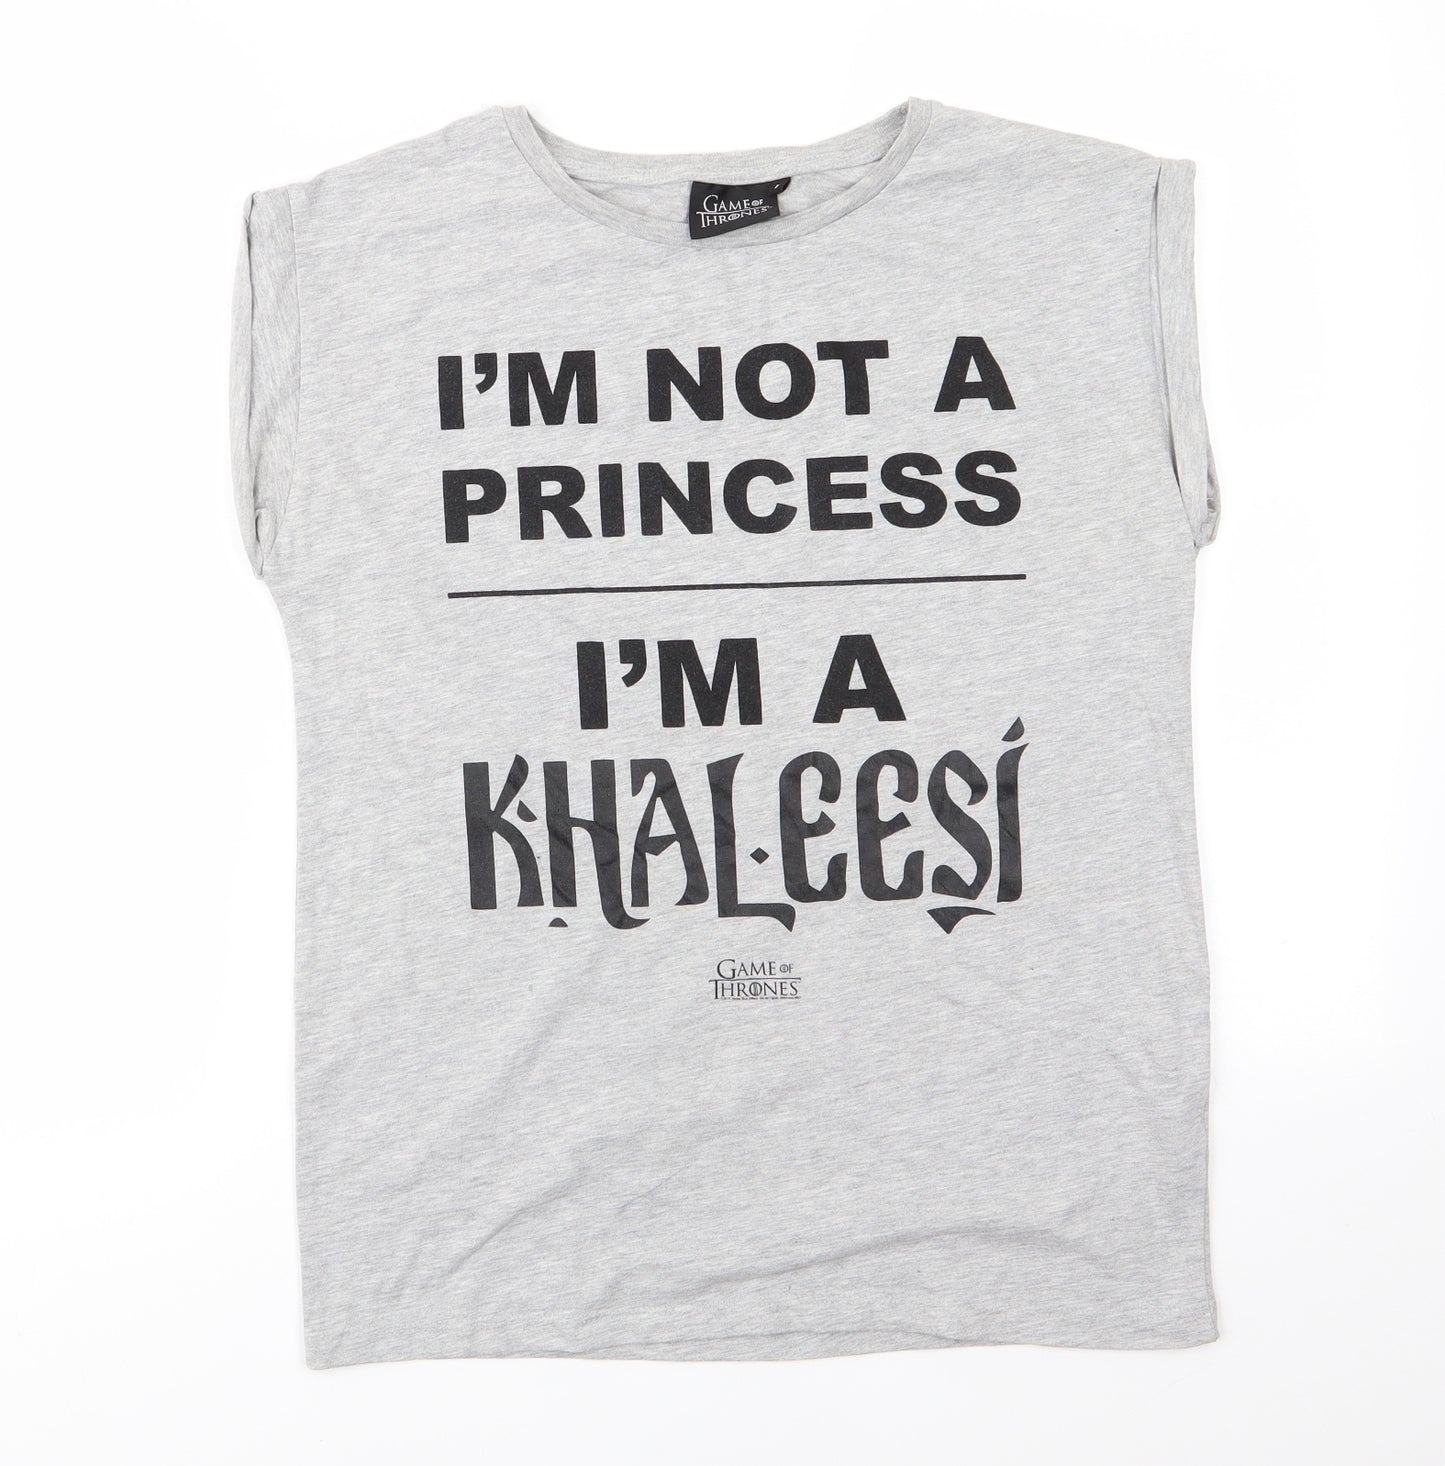 Game Of Thrones Womens Grey   Basic T-Shirt Size 8 Round Neck - I'm not a princess